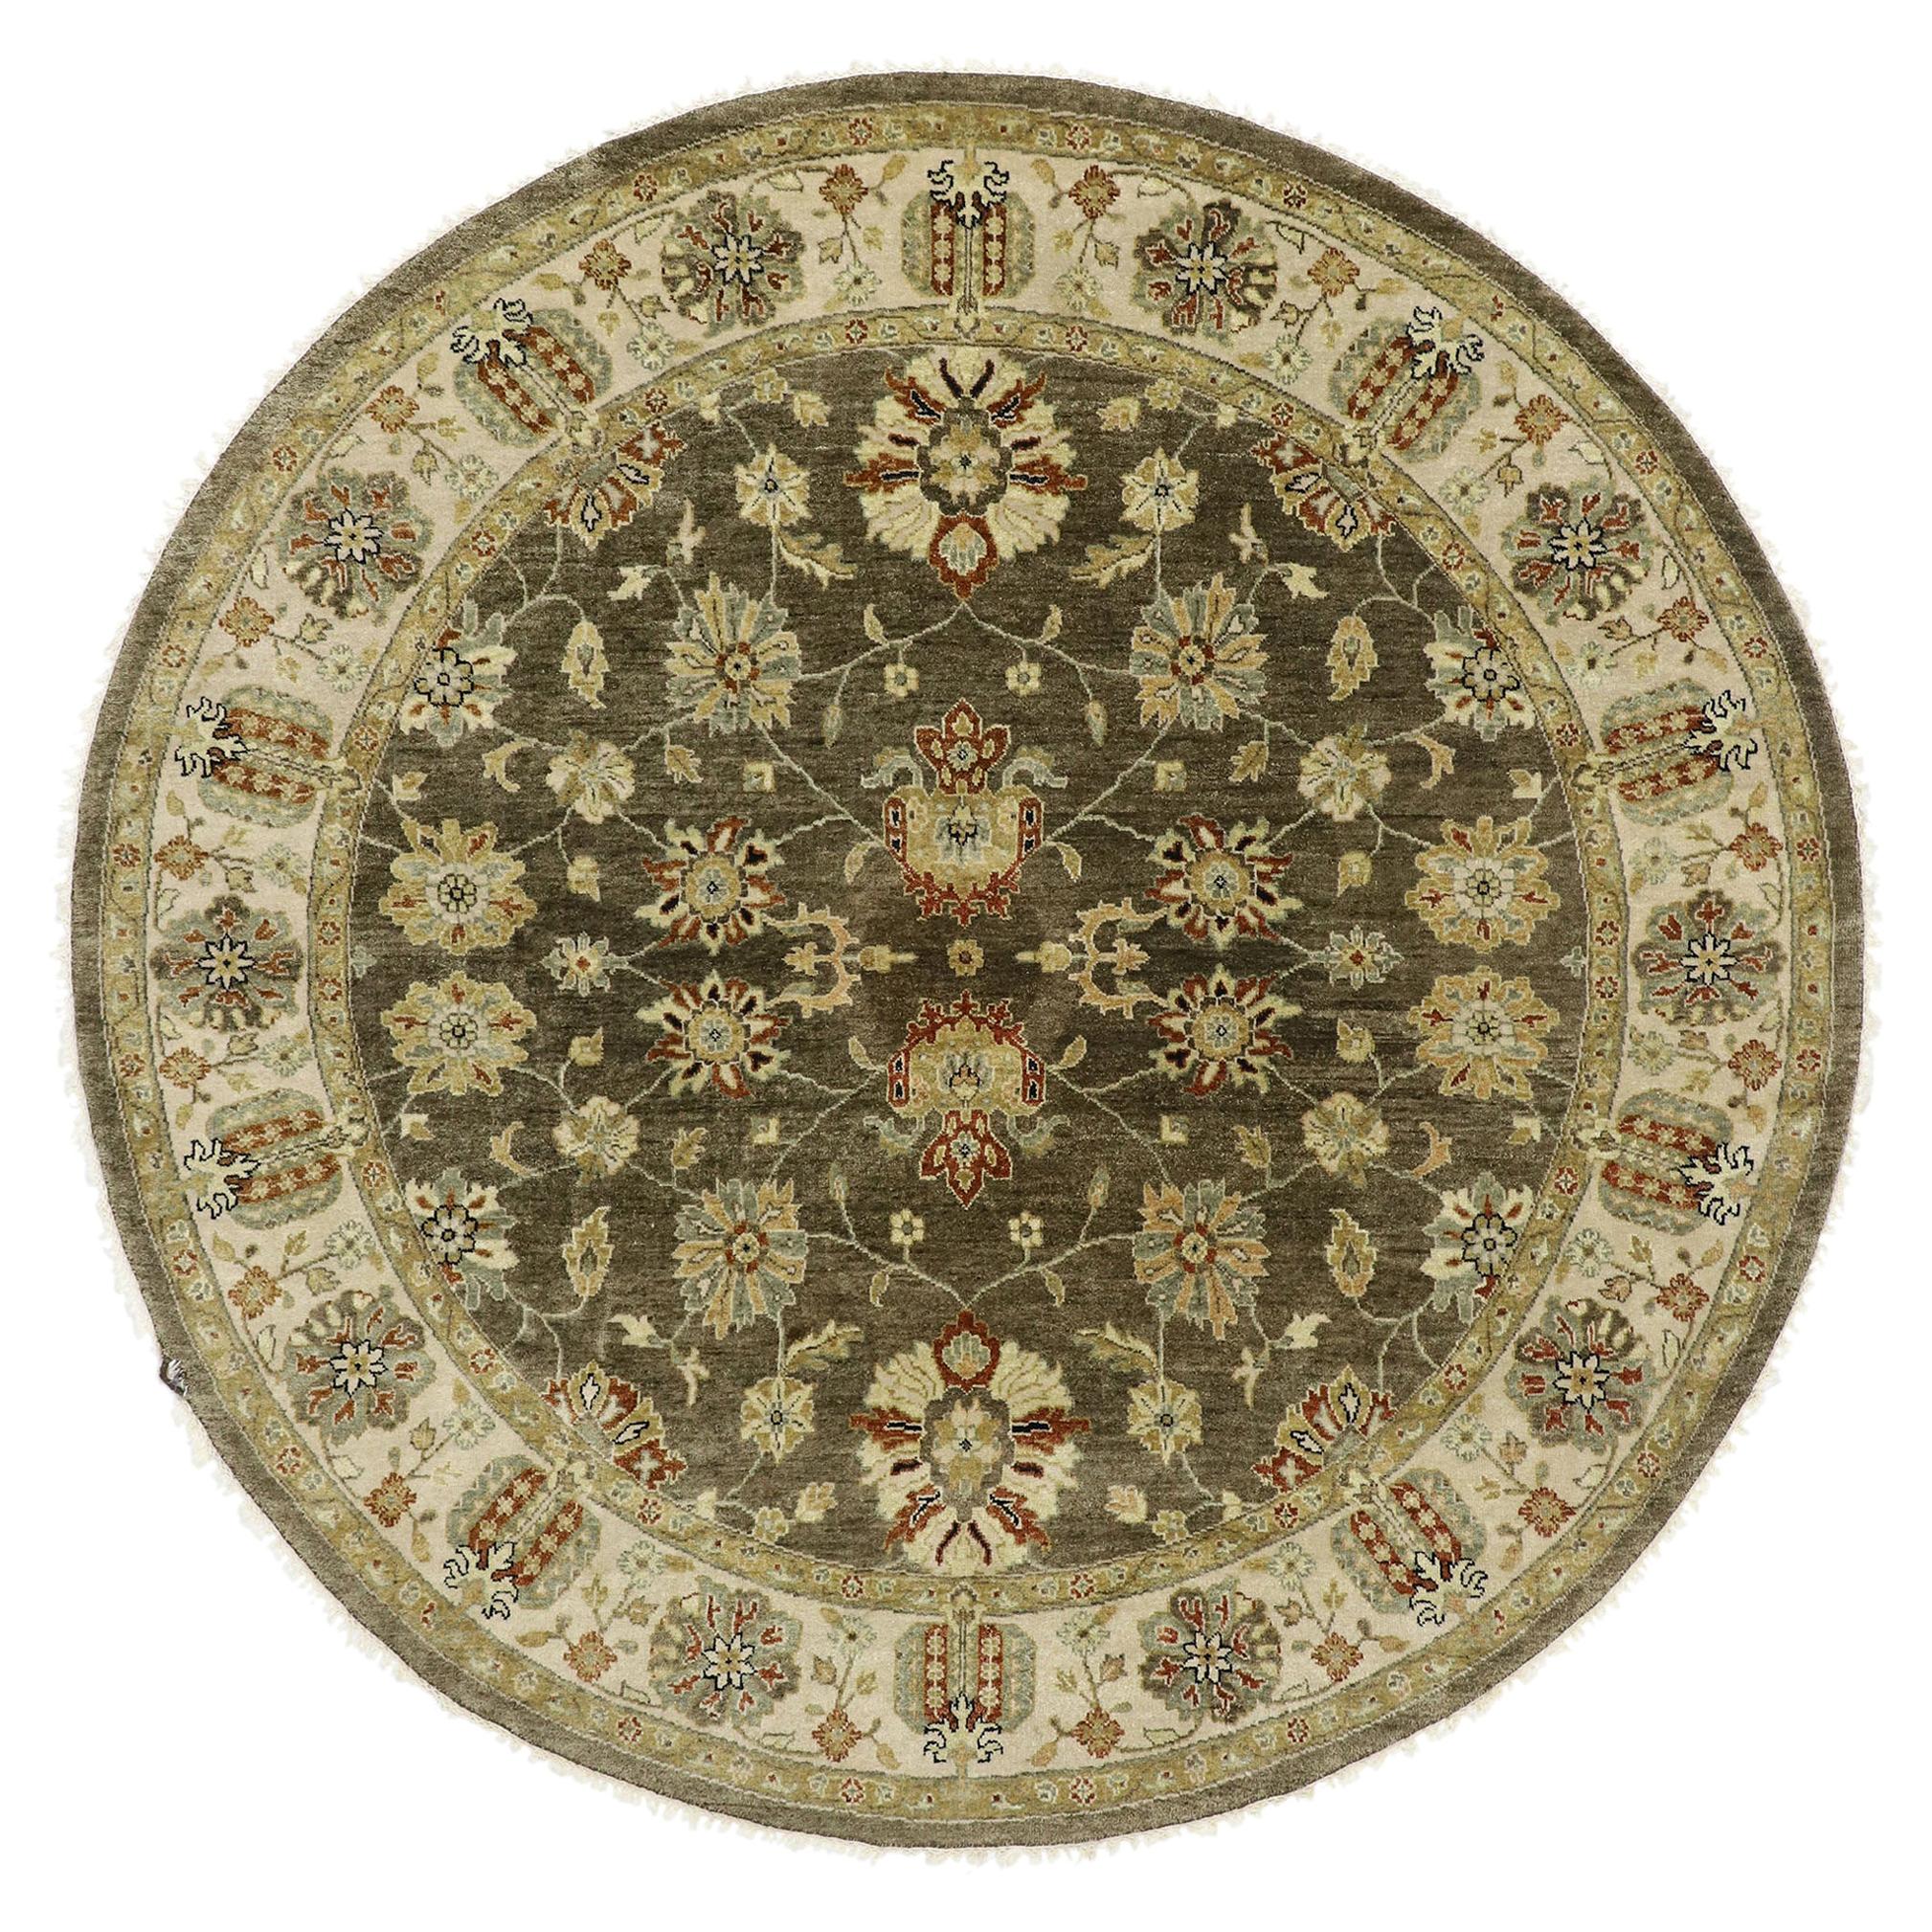 Vintage Indian Round Area Rug, Circular Rug with Arts and Crafts Style For Sale